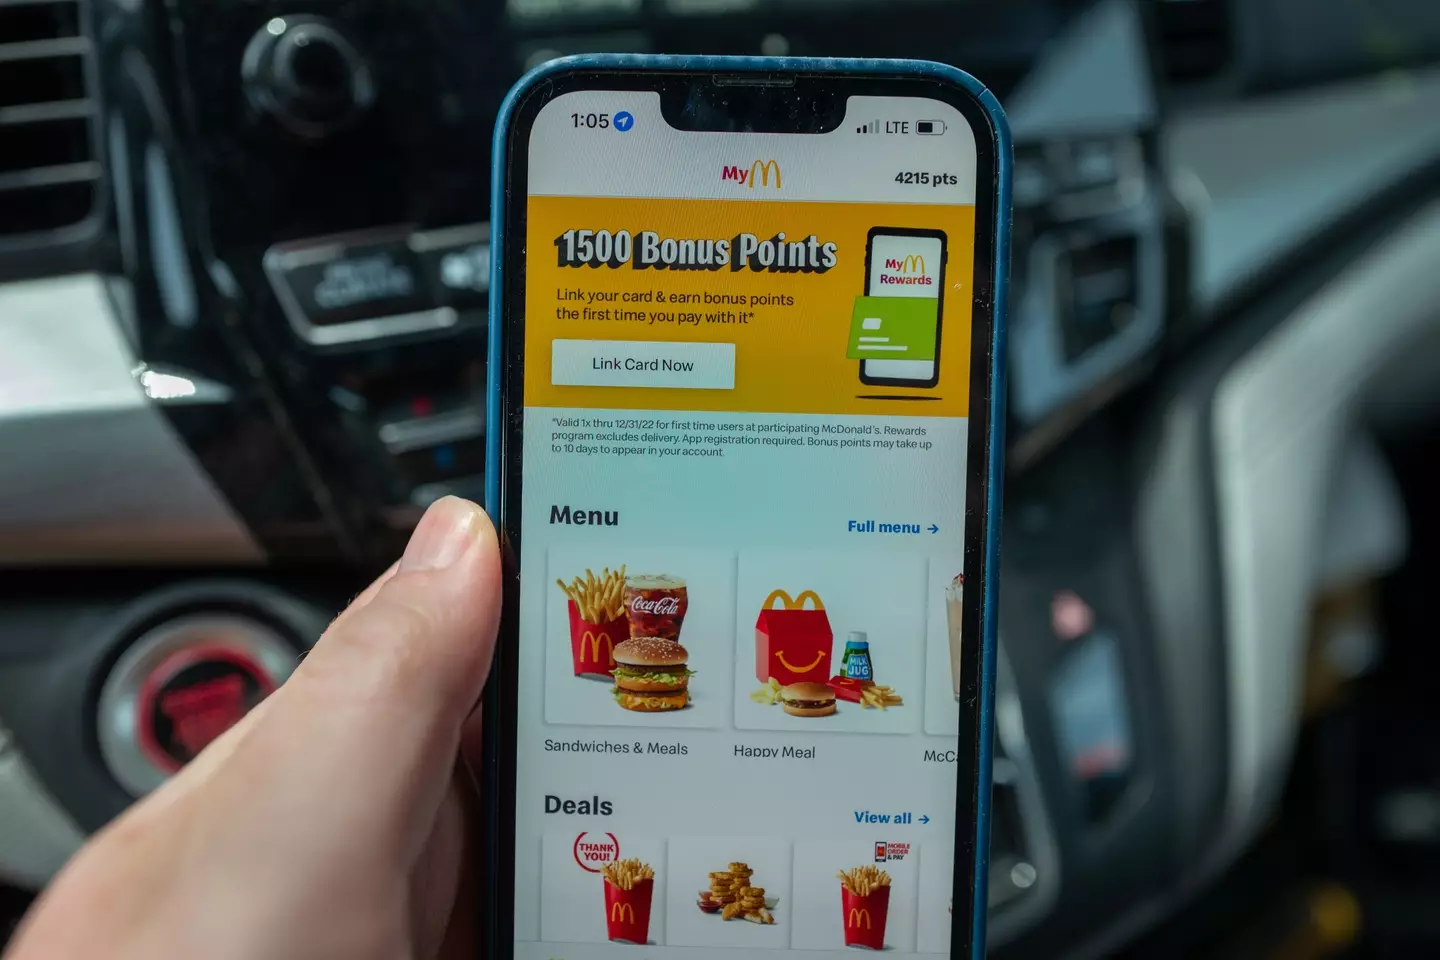 The offer is available on the McDonald's App.